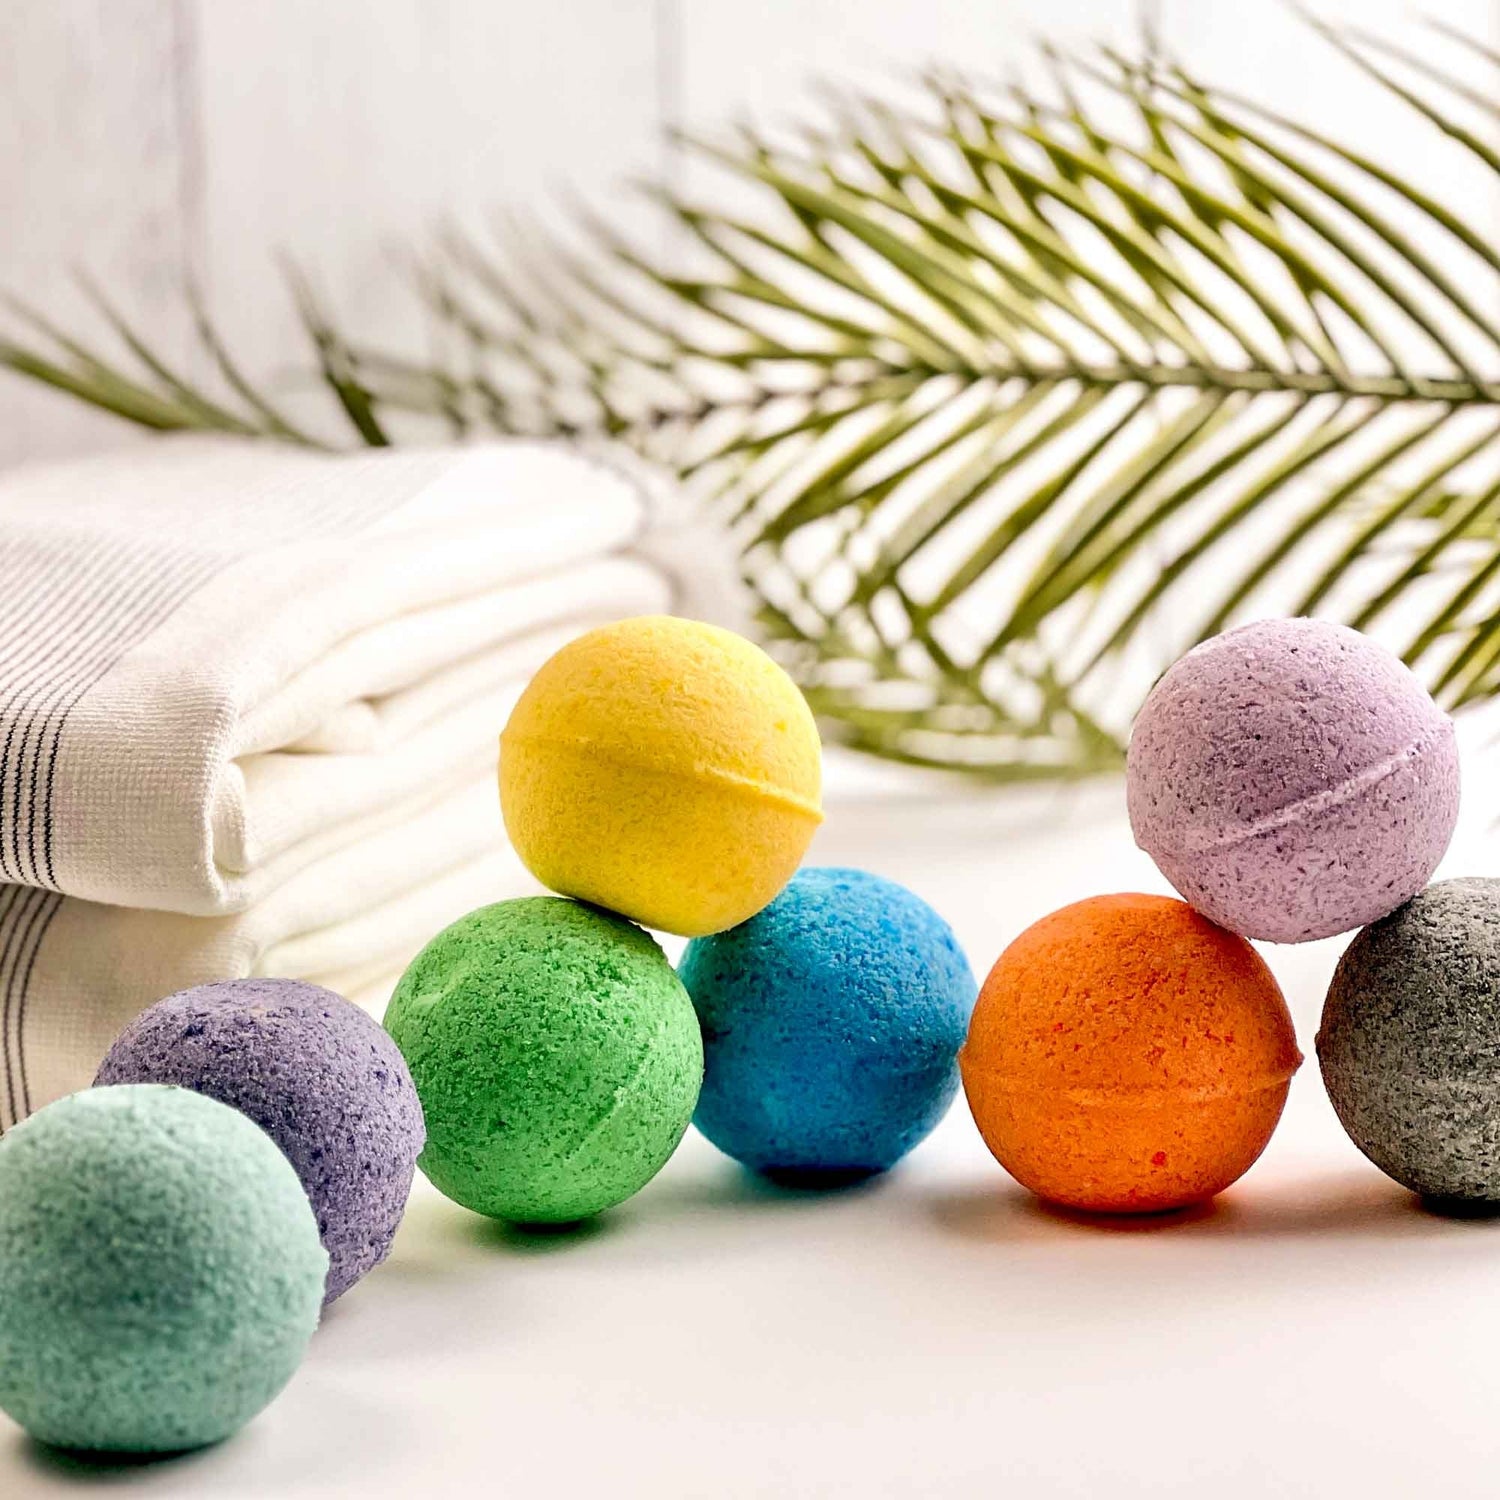 Unwind in a luxurious bath with our Ocean Rose Bath Bombs. Infused with natural ingredients, they&